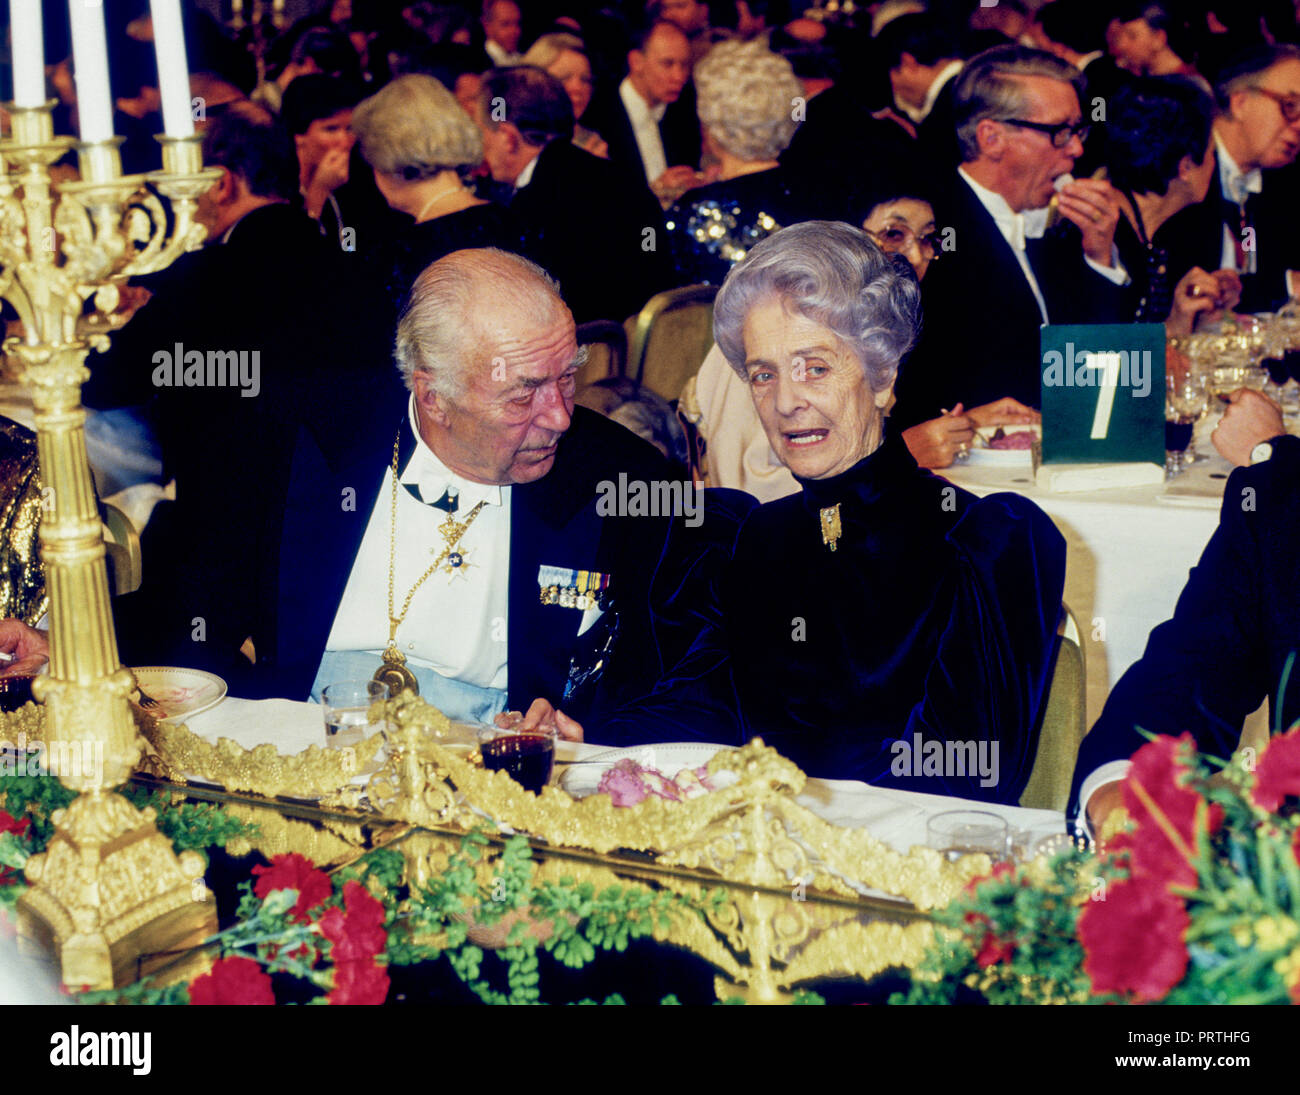 RITA LEVI MONTALCINI Italian Nobel Laureate in medicine at Nobel dinner in Stockholm City hall with the Swedish Prince Bertil at the table.She was the Stock Photo